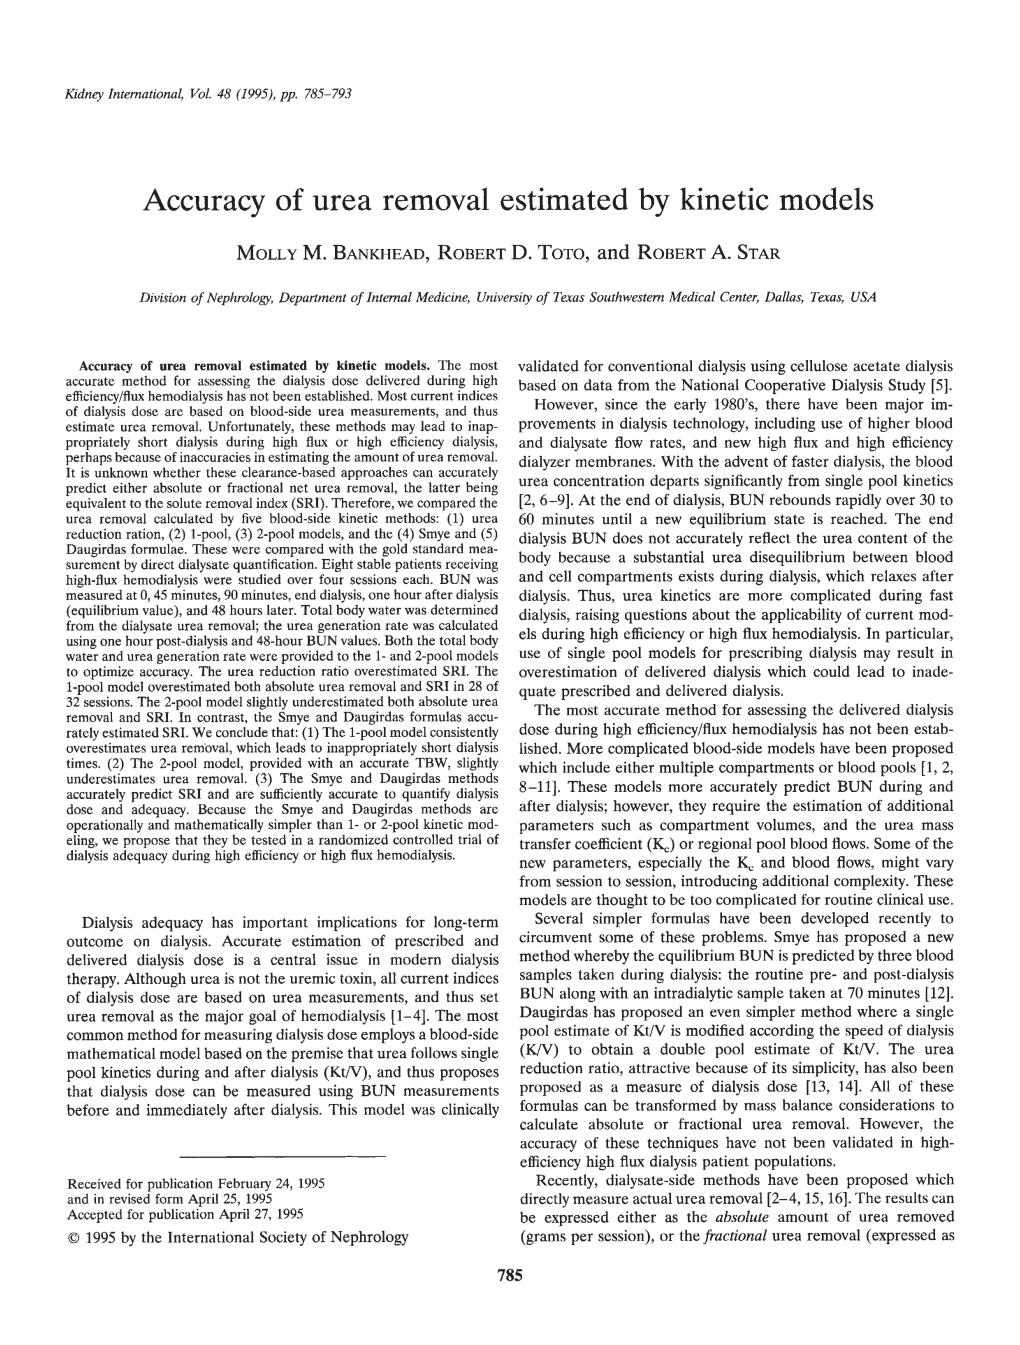 Accuracy of Urea Removal Estimated by Kinetic Models